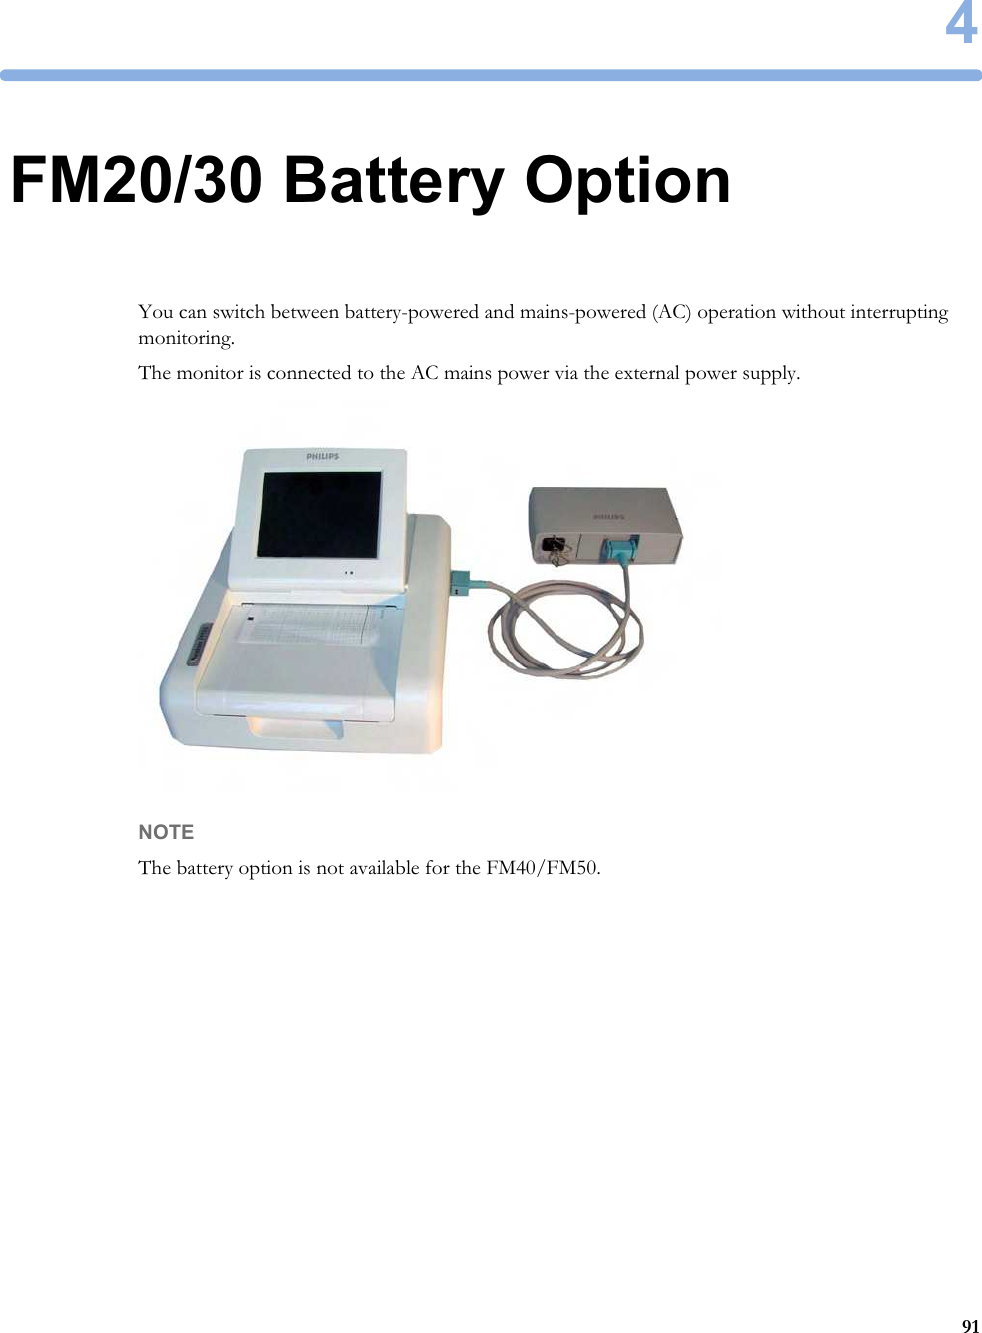 4914FM20/30 Battery OptionYou can switch between battery-powered and mains-powered (AC) operation without interrupting monitoring.The monitor is connected to the AC mains power via the external power supply.NOTEThe battery option is not available for the FM40/FM50.